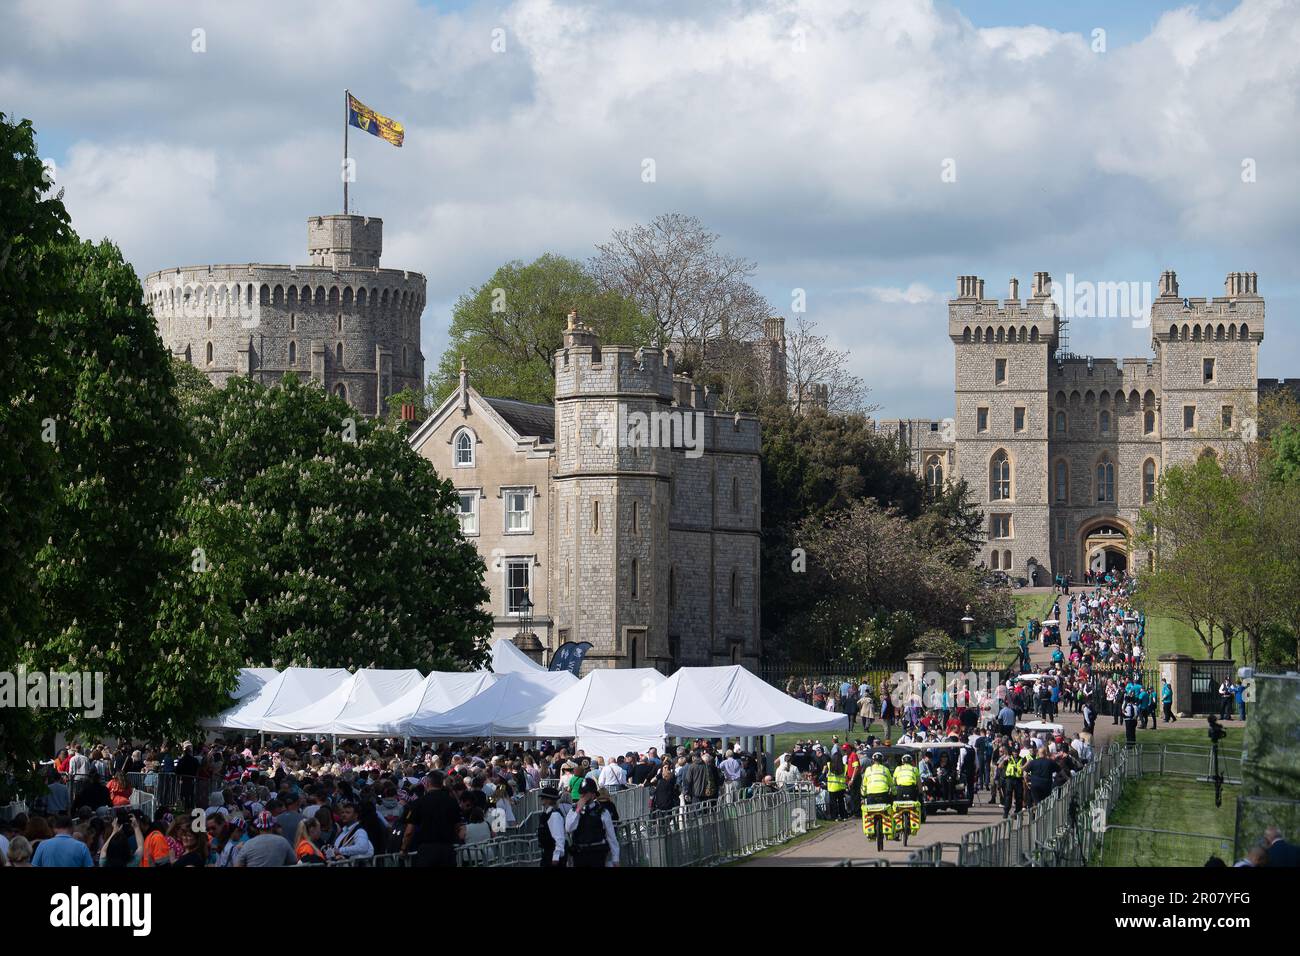 Windsor, Berkshire, UK. 7th May, 2023. The Coronation Concert guests queuing on the Long Walk in Windsor and heading through the Cambridge Gate into the private grounds of Windsor Castle. 20,000 lucky ticket holders will enjoy the Coronation Concert this evening in the presence of the Royal Family. Credit: Maureen McLean/Alamy Live News Stock Photo